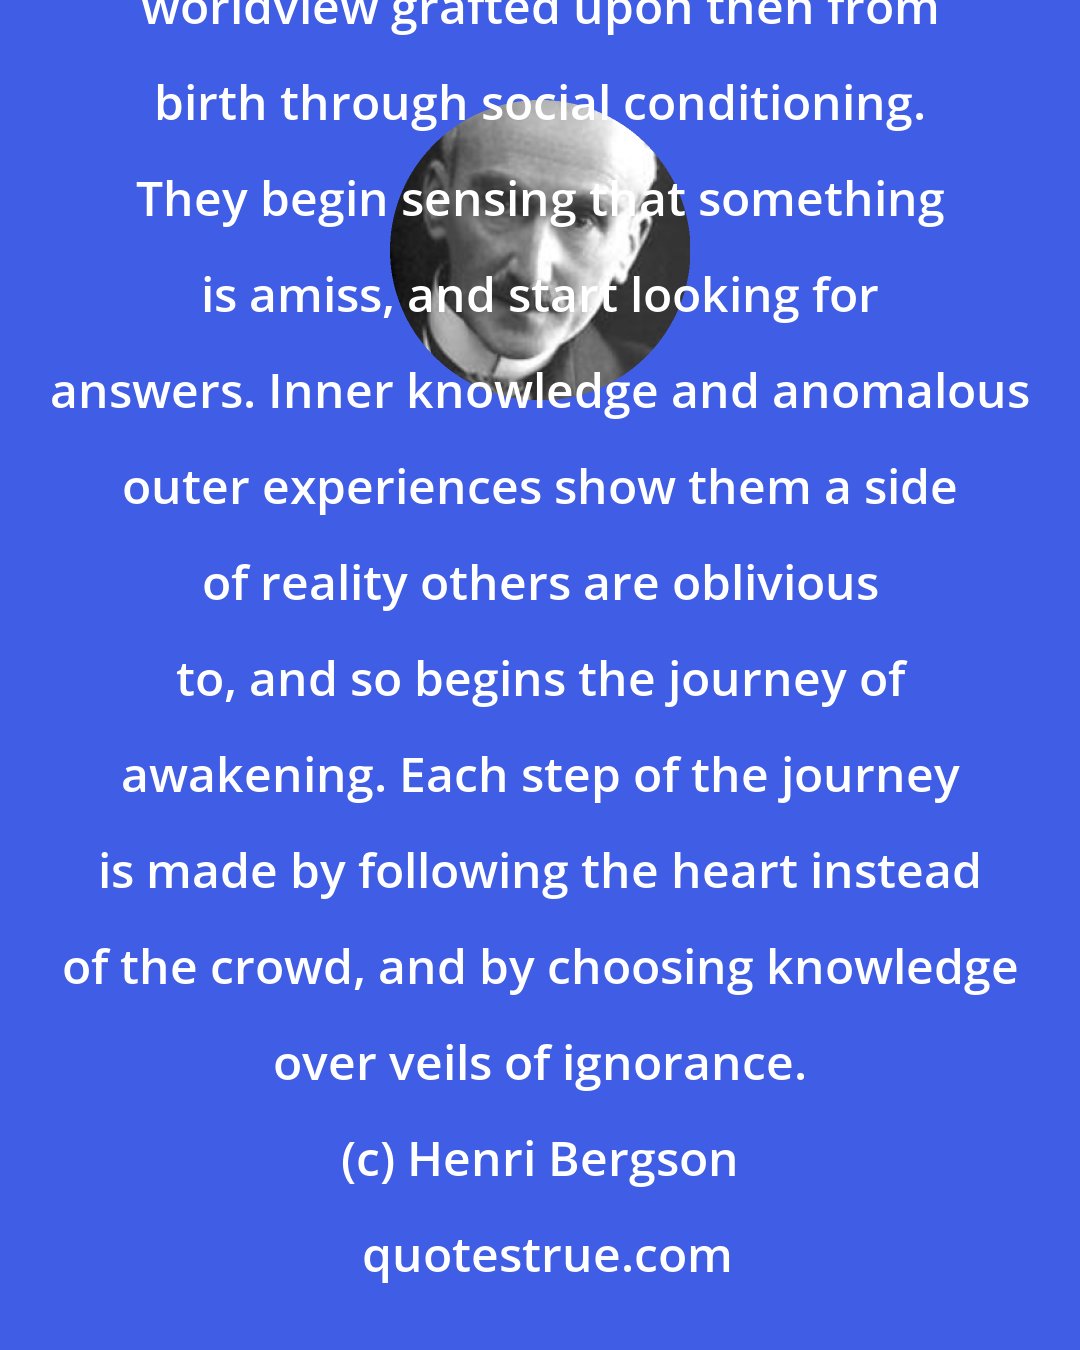 Henri Bergson: Fortunately, some are born with spiritual immune systems that sooner or later give rejection to the illusory worldview grafted upon then from birth through social conditioning. They begin sensing that something is amiss, and start looking for answers. Inner knowledge and anomalous outer experiences show them a side of reality others are oblivious to, and so begins the journey of awakening. Each step of the journey is made by following the heart instead of the crowd, and by choosing knowledge over veils of ignorance.